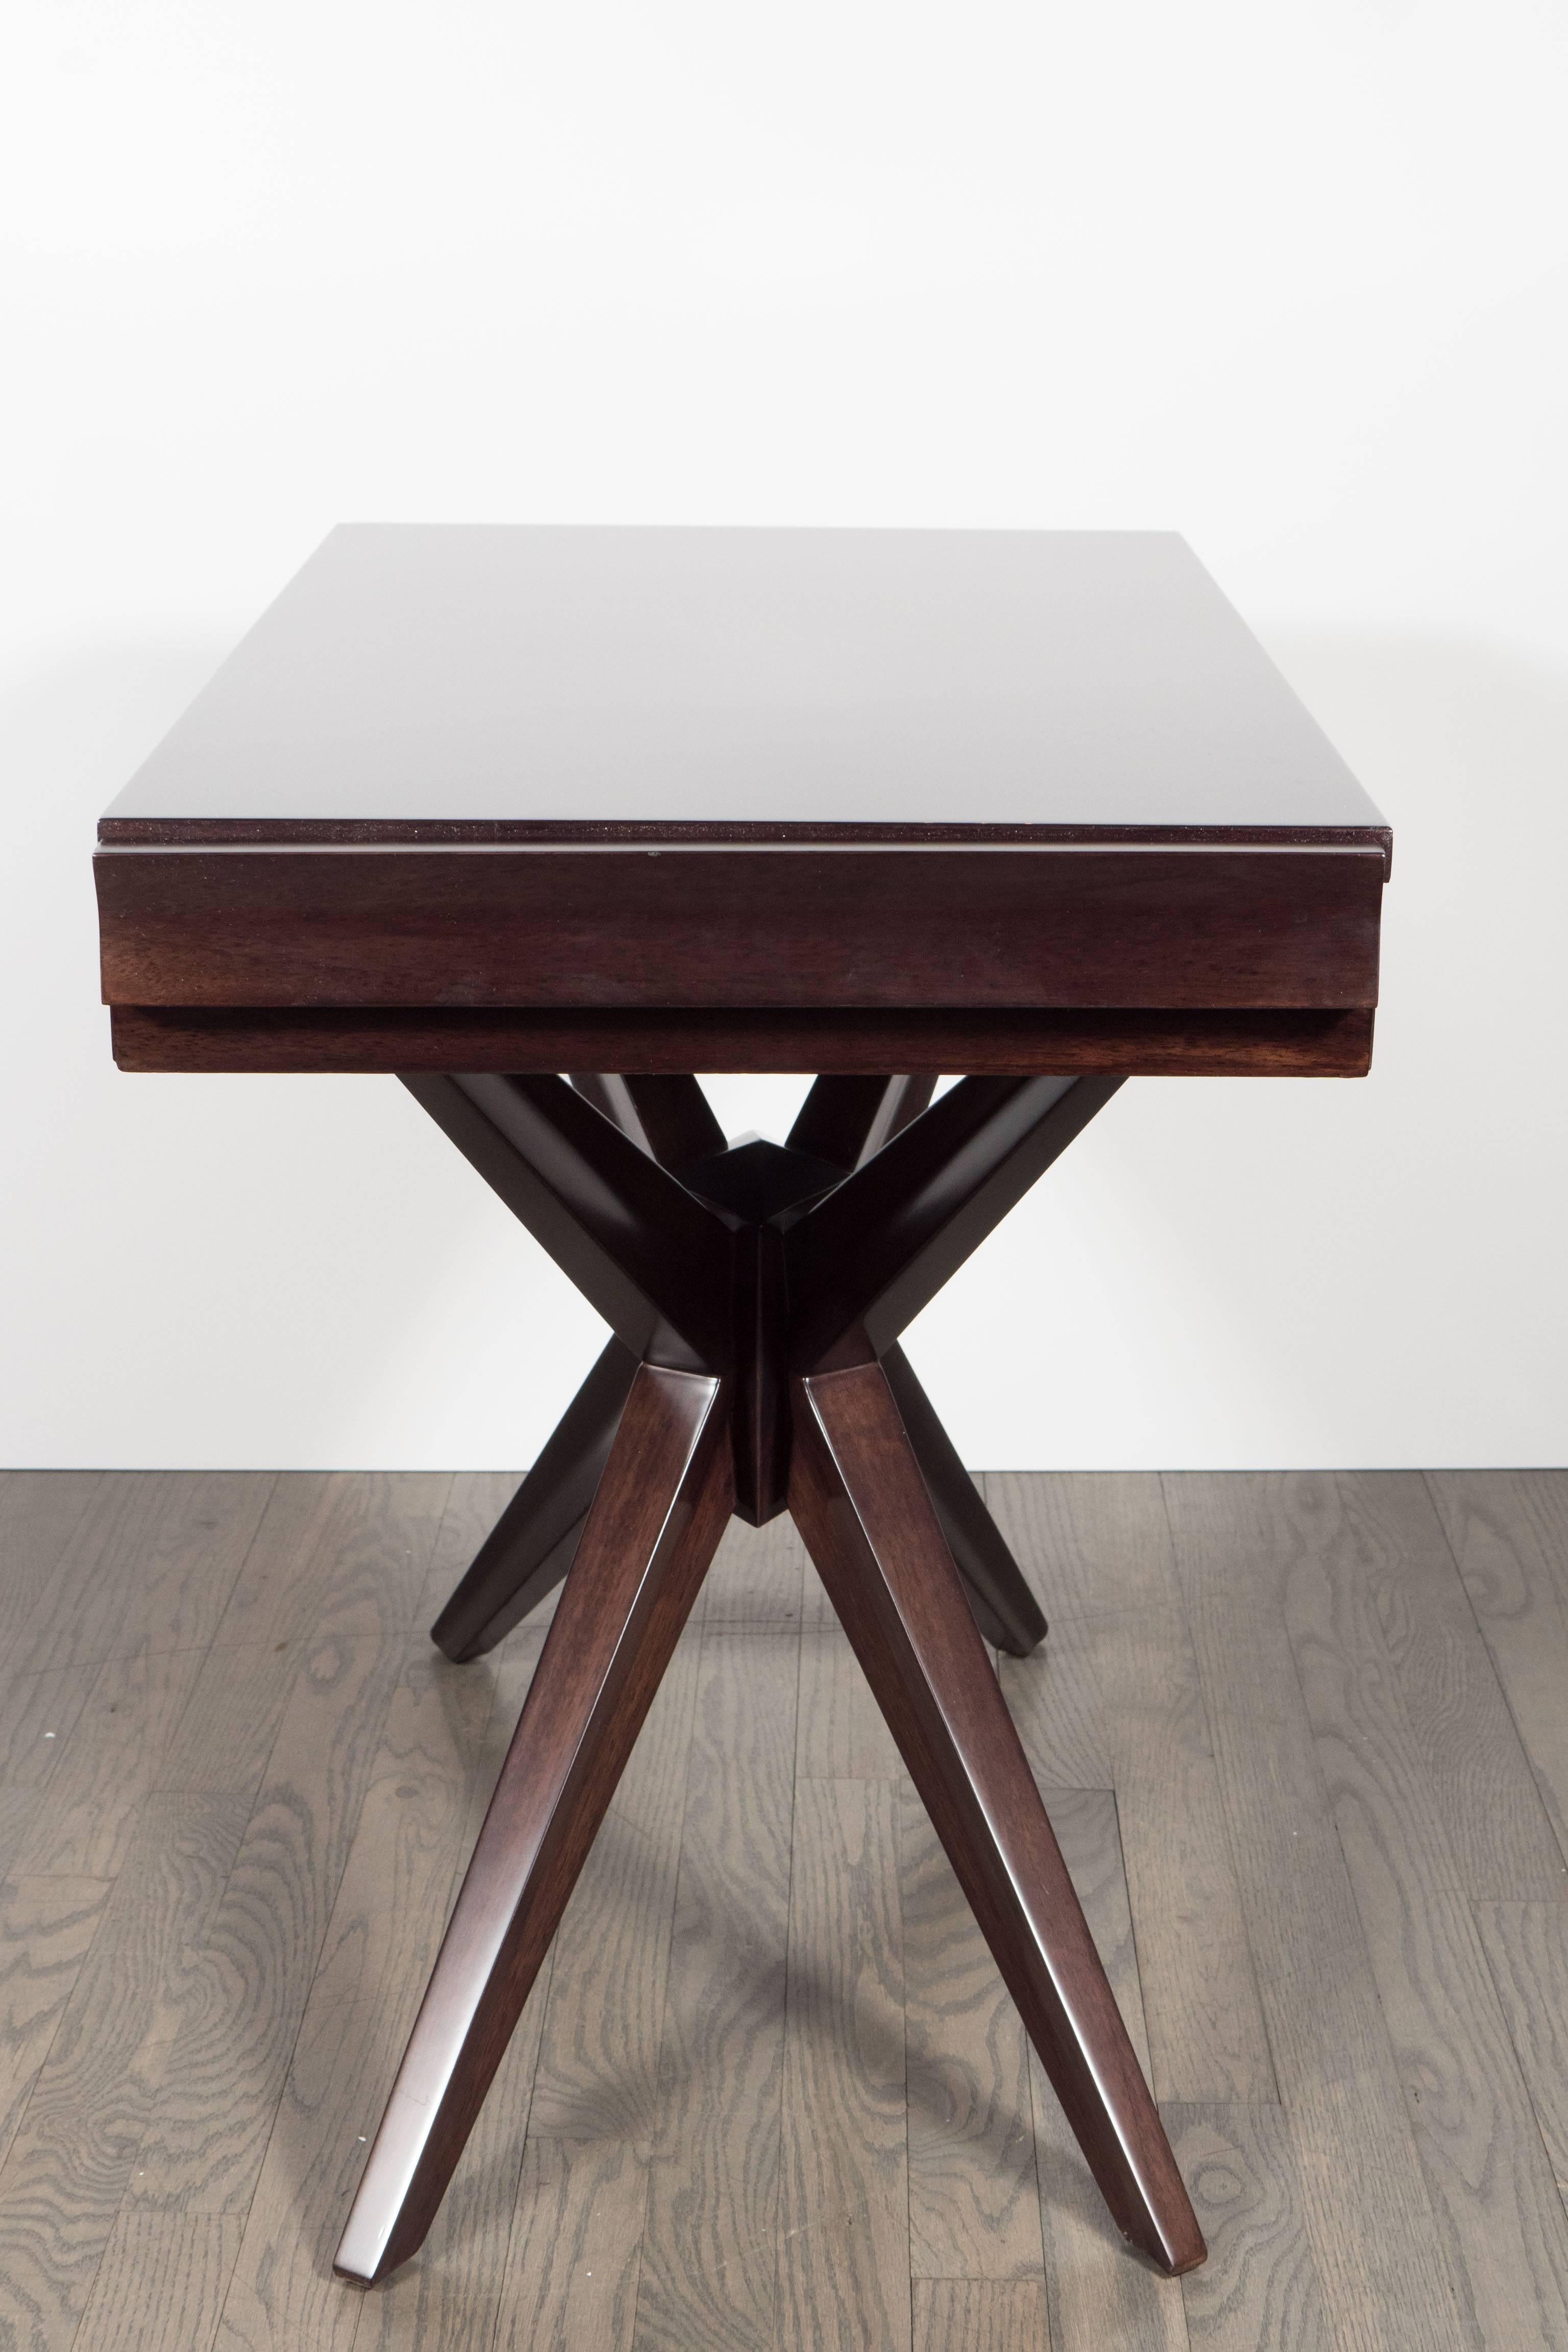 This graphic Mid-Century Modern sculptural end table was realized in the United States, circa 1950. It features splayed legs forming an X-base all crafted in ebonized walnut. Four angled, slightly tapered splayed legs stem from a central support.